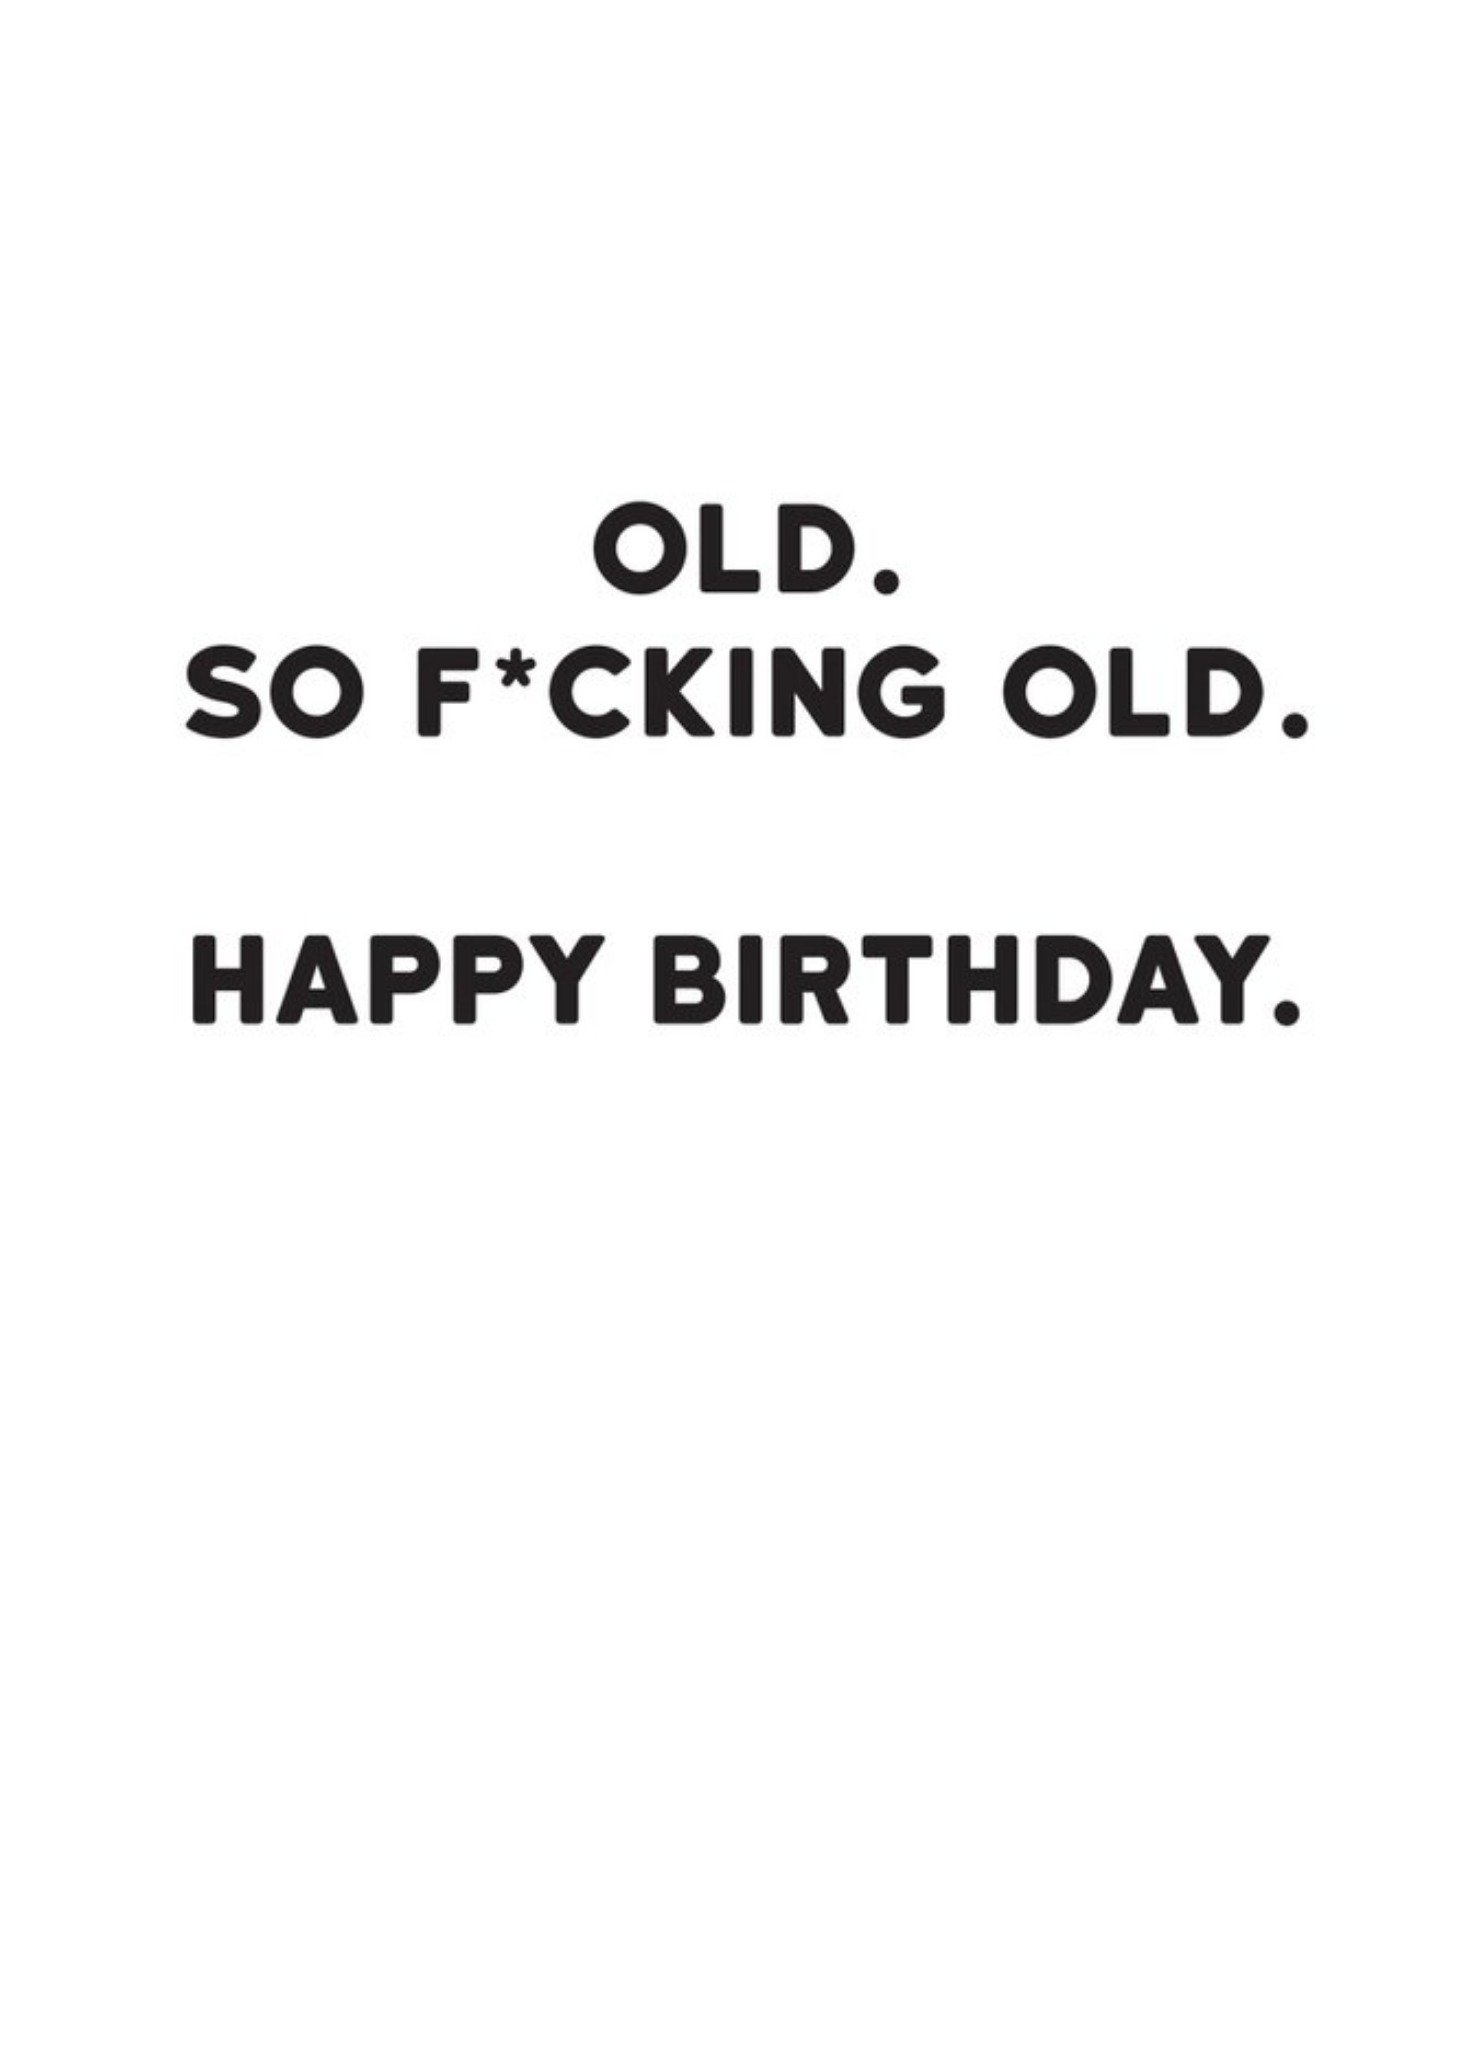 Moonpig Modern Funny Typographical Old So Old Birthday Card, Large